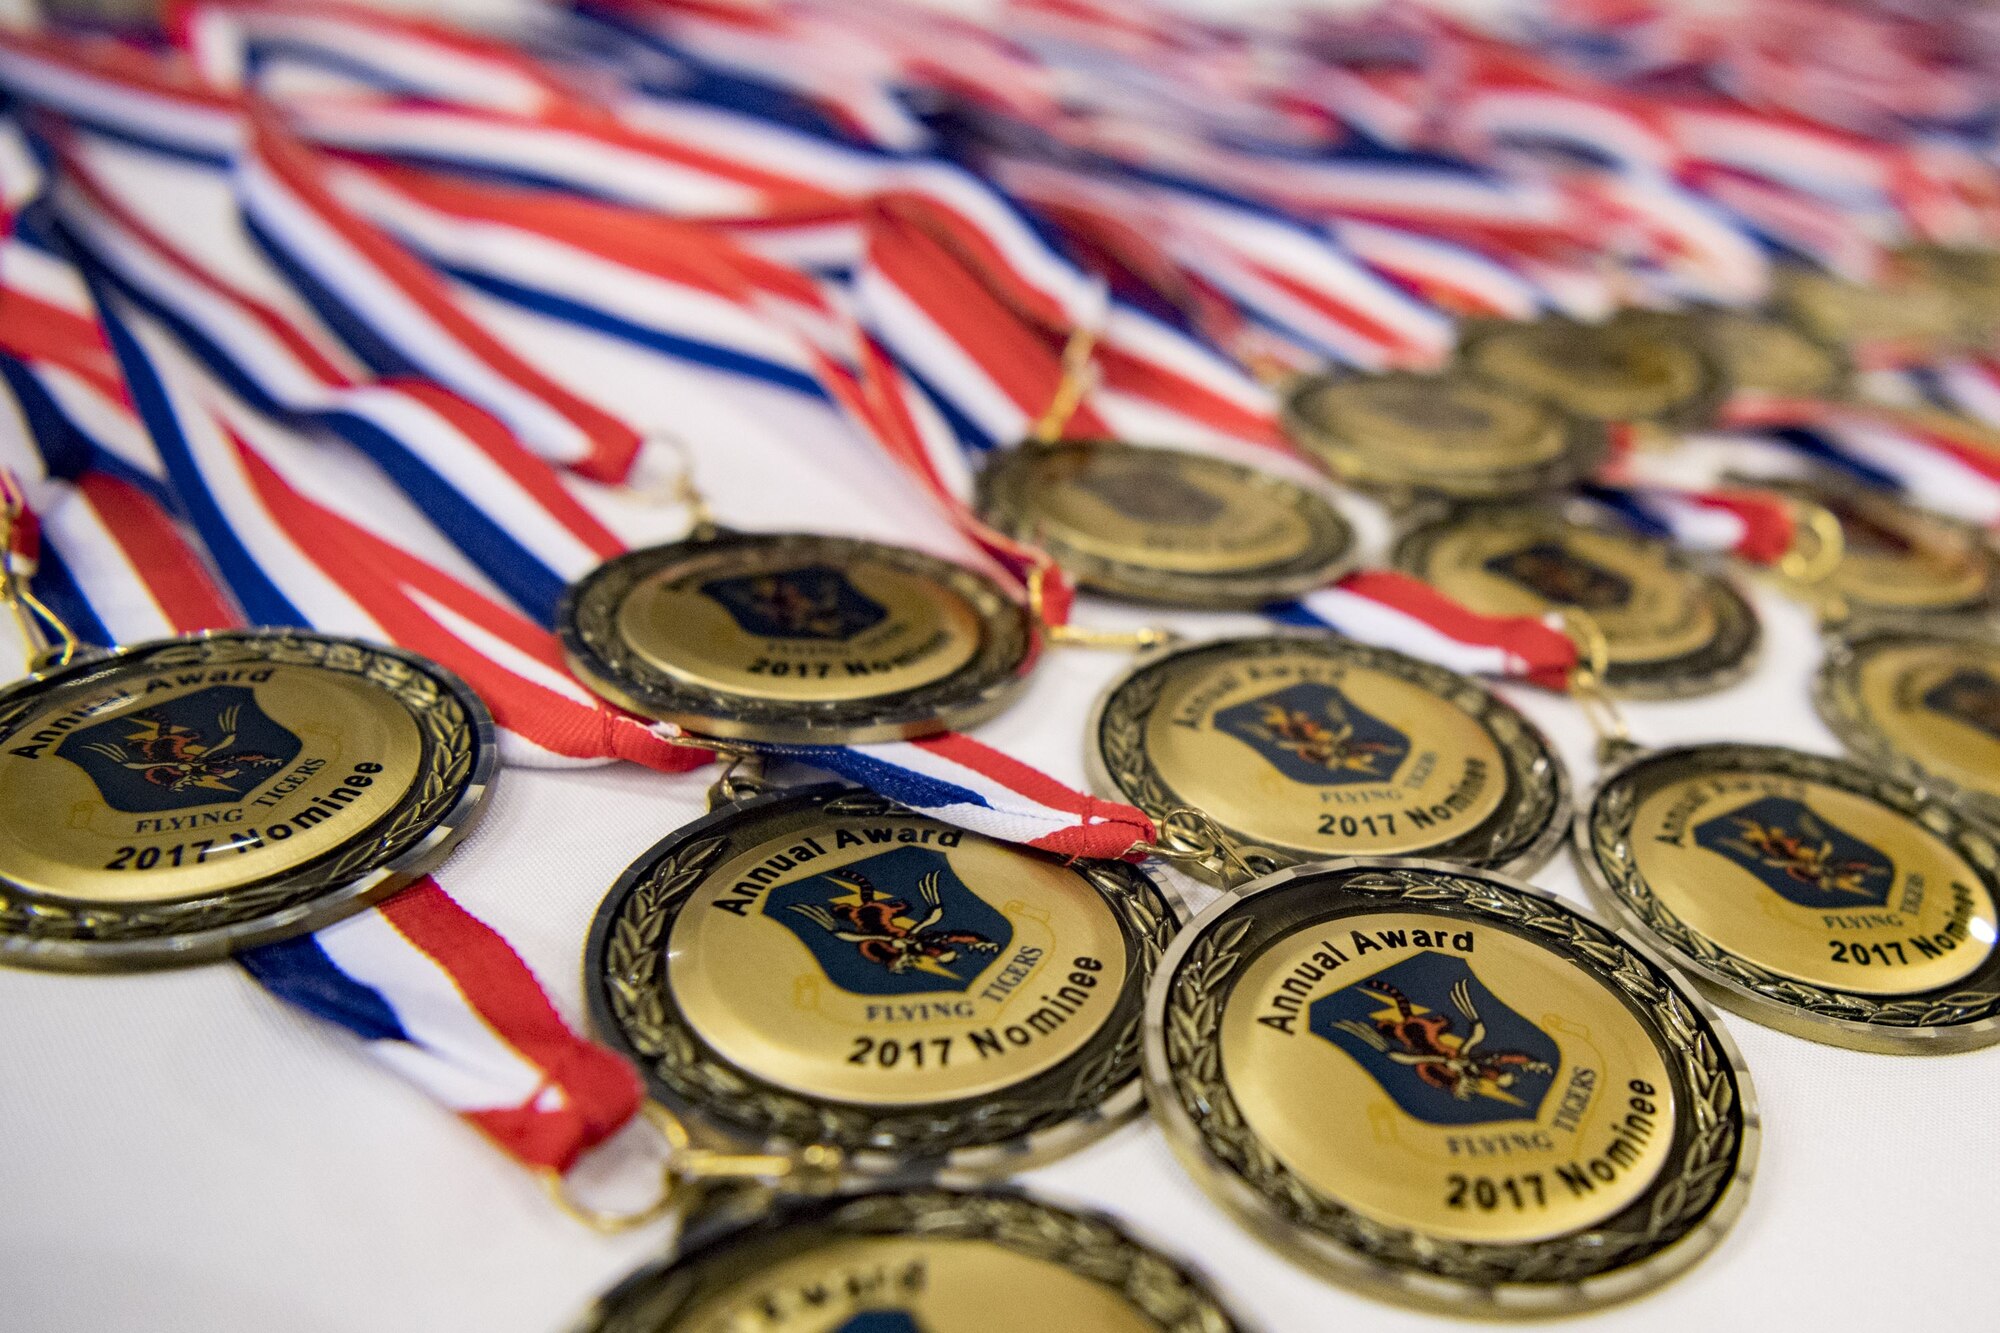 Medallions sit on a table before a Tour of Champions, Feb. 2, 2018, at Moody Air Force Base, Ga. The Tour of Champions recognizes 23d Wing annual award nominees and an opportunity to gain a better perspective of the 23d Wing’s mission. (U.S. Air Force photo by Senior Airman Daniel Snider)